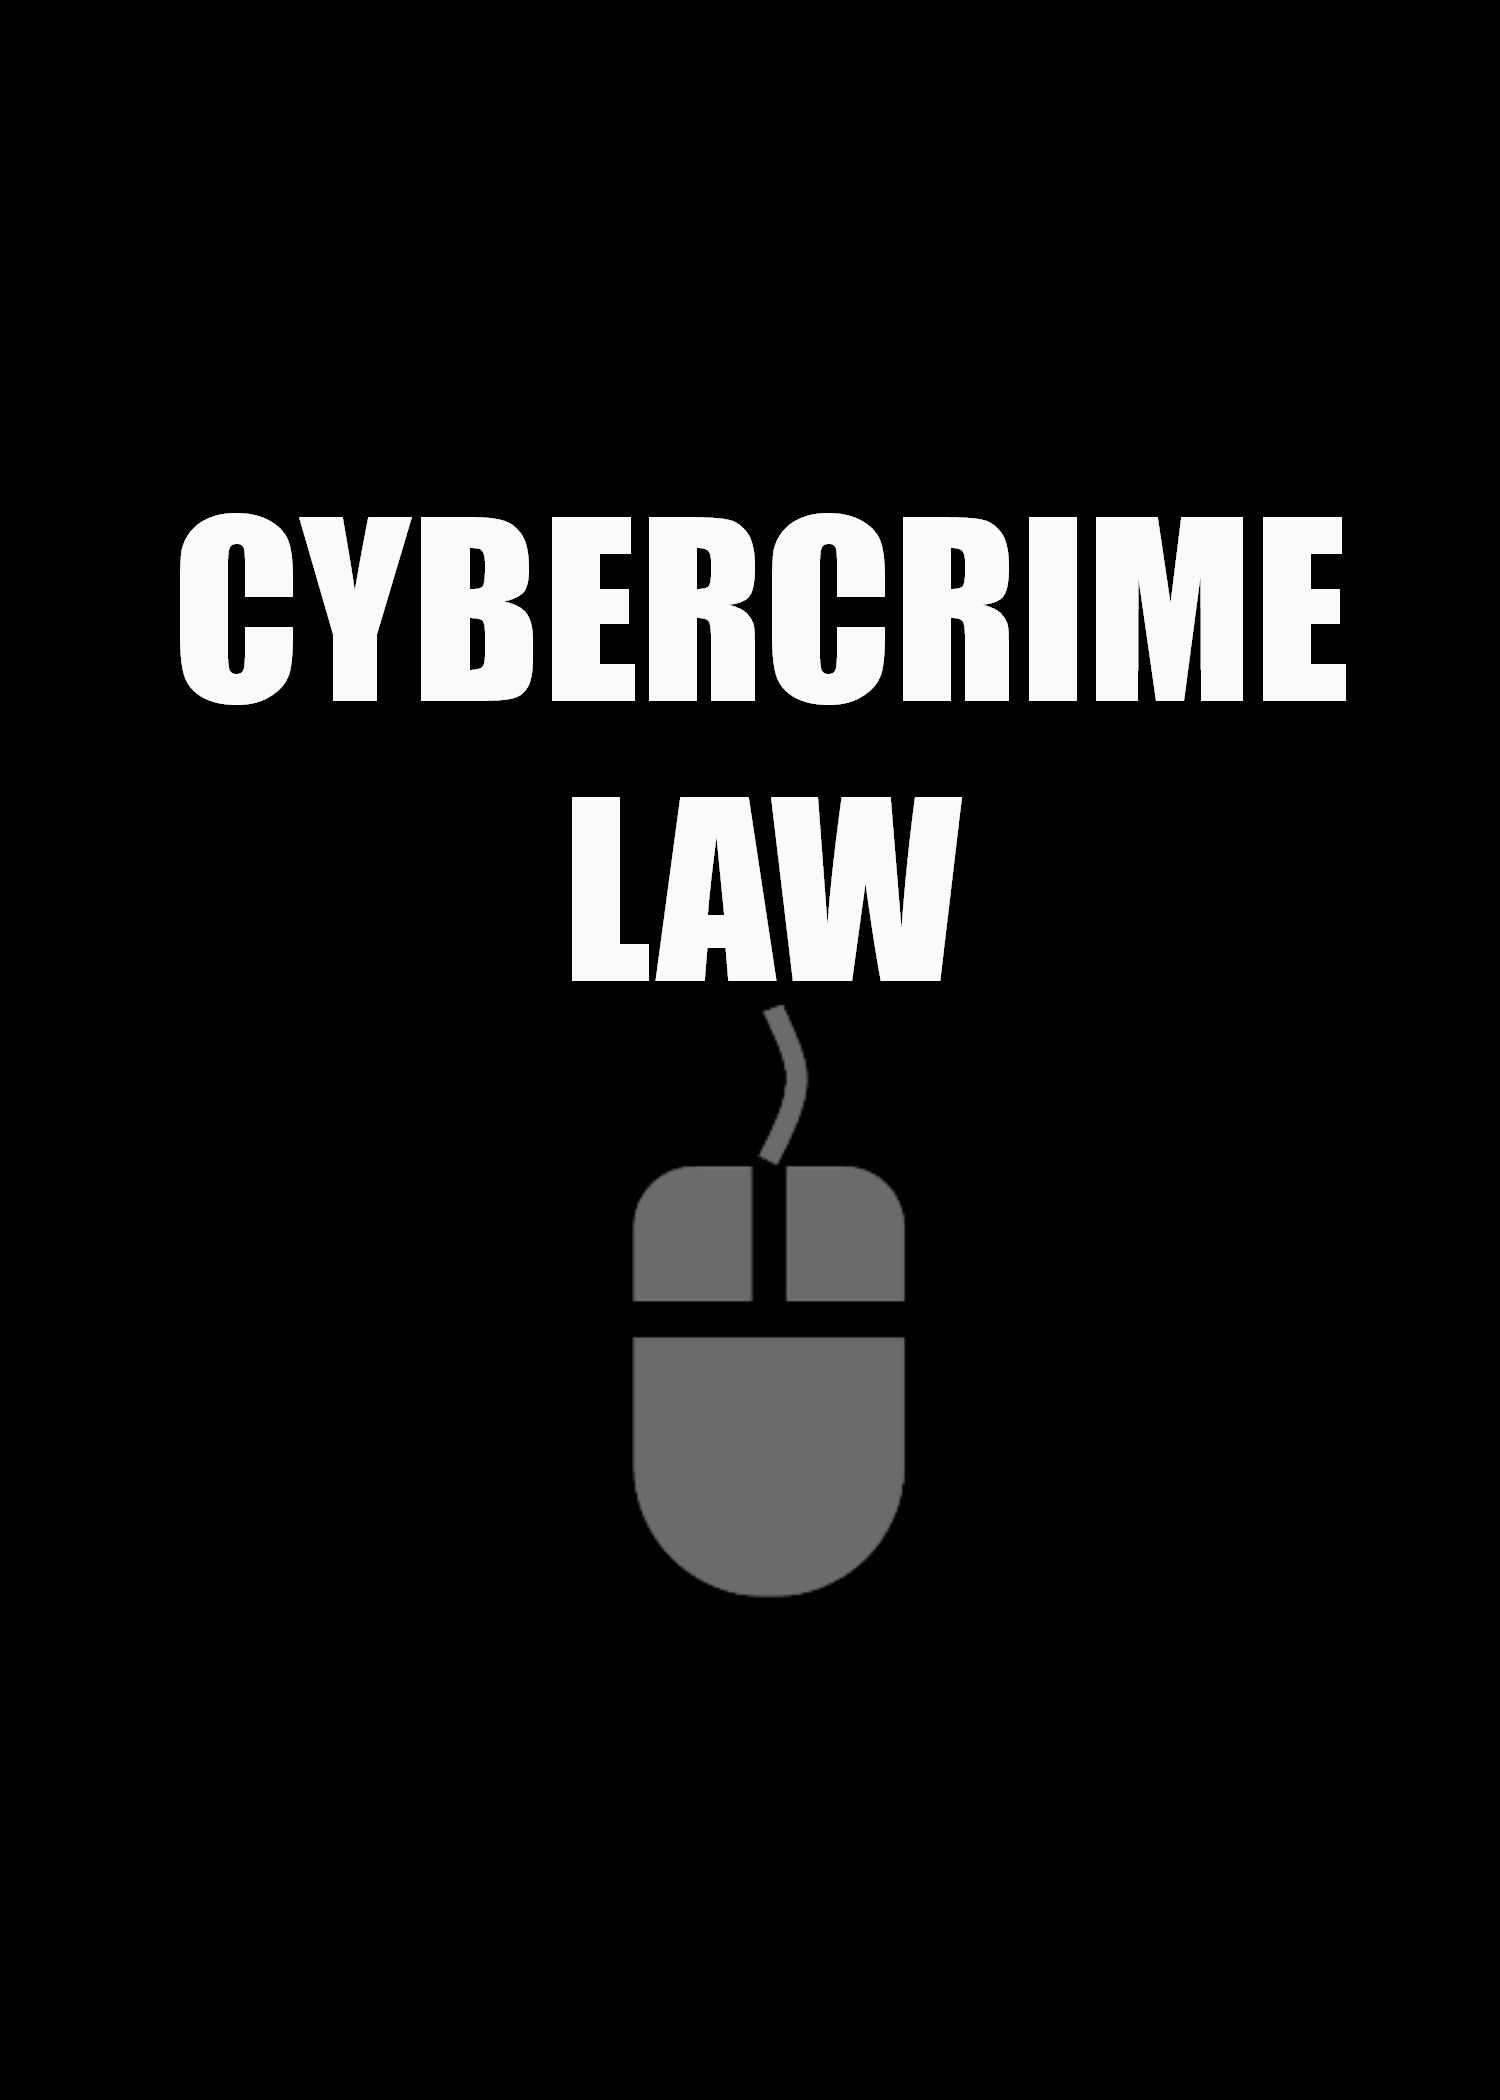 Cybercrime and law